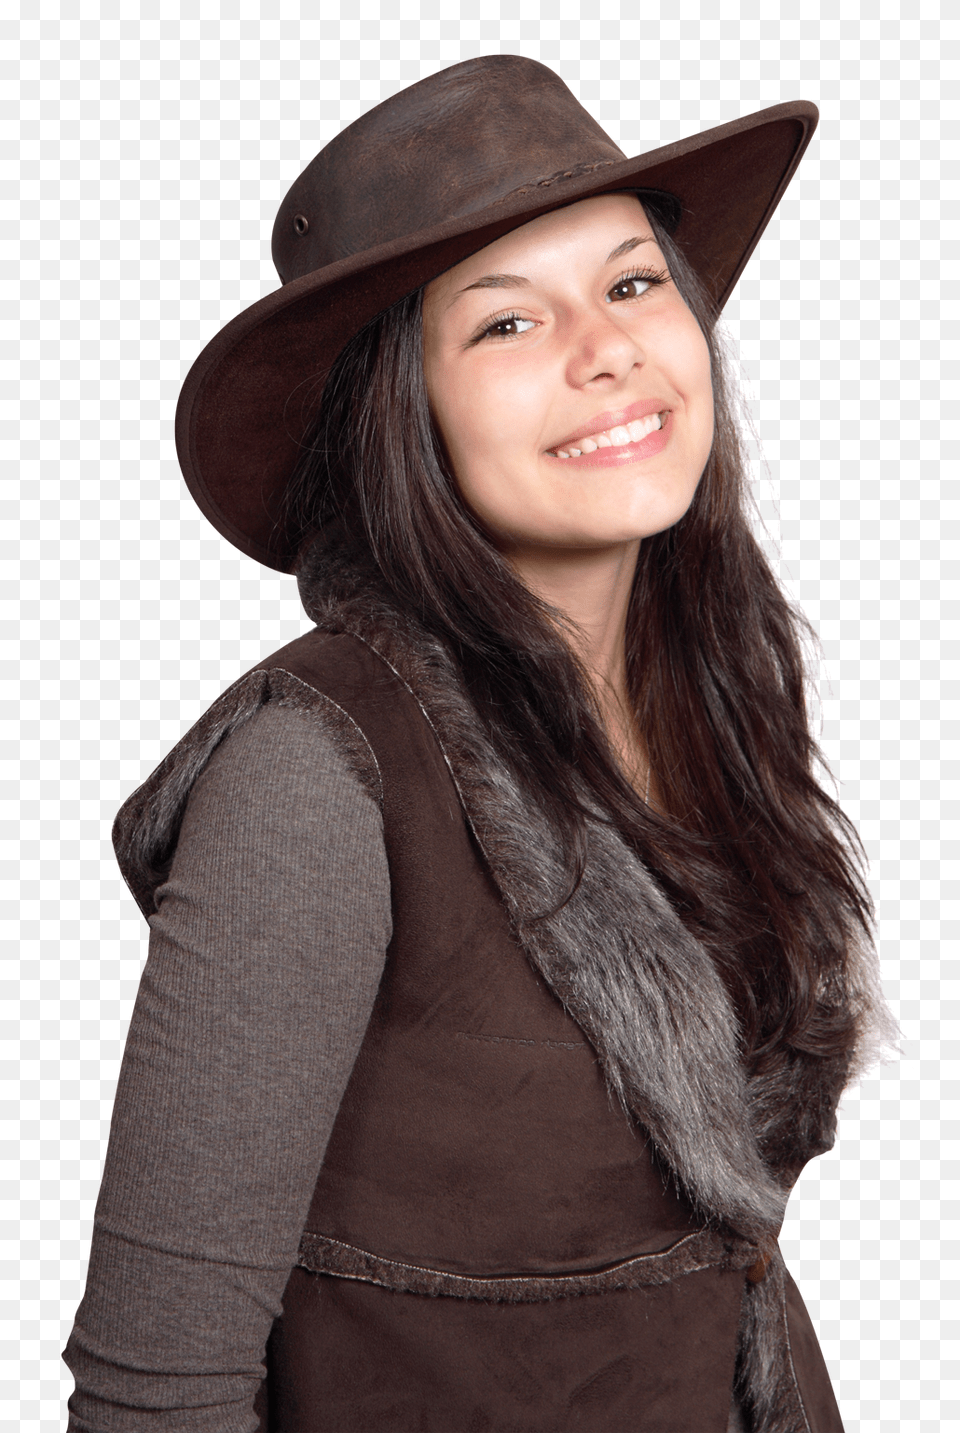 Pngpix Com Smiling Cowgirl Woman Wearing Cowboy Hat Image, Adult, Sun Hat, Person, Female Png